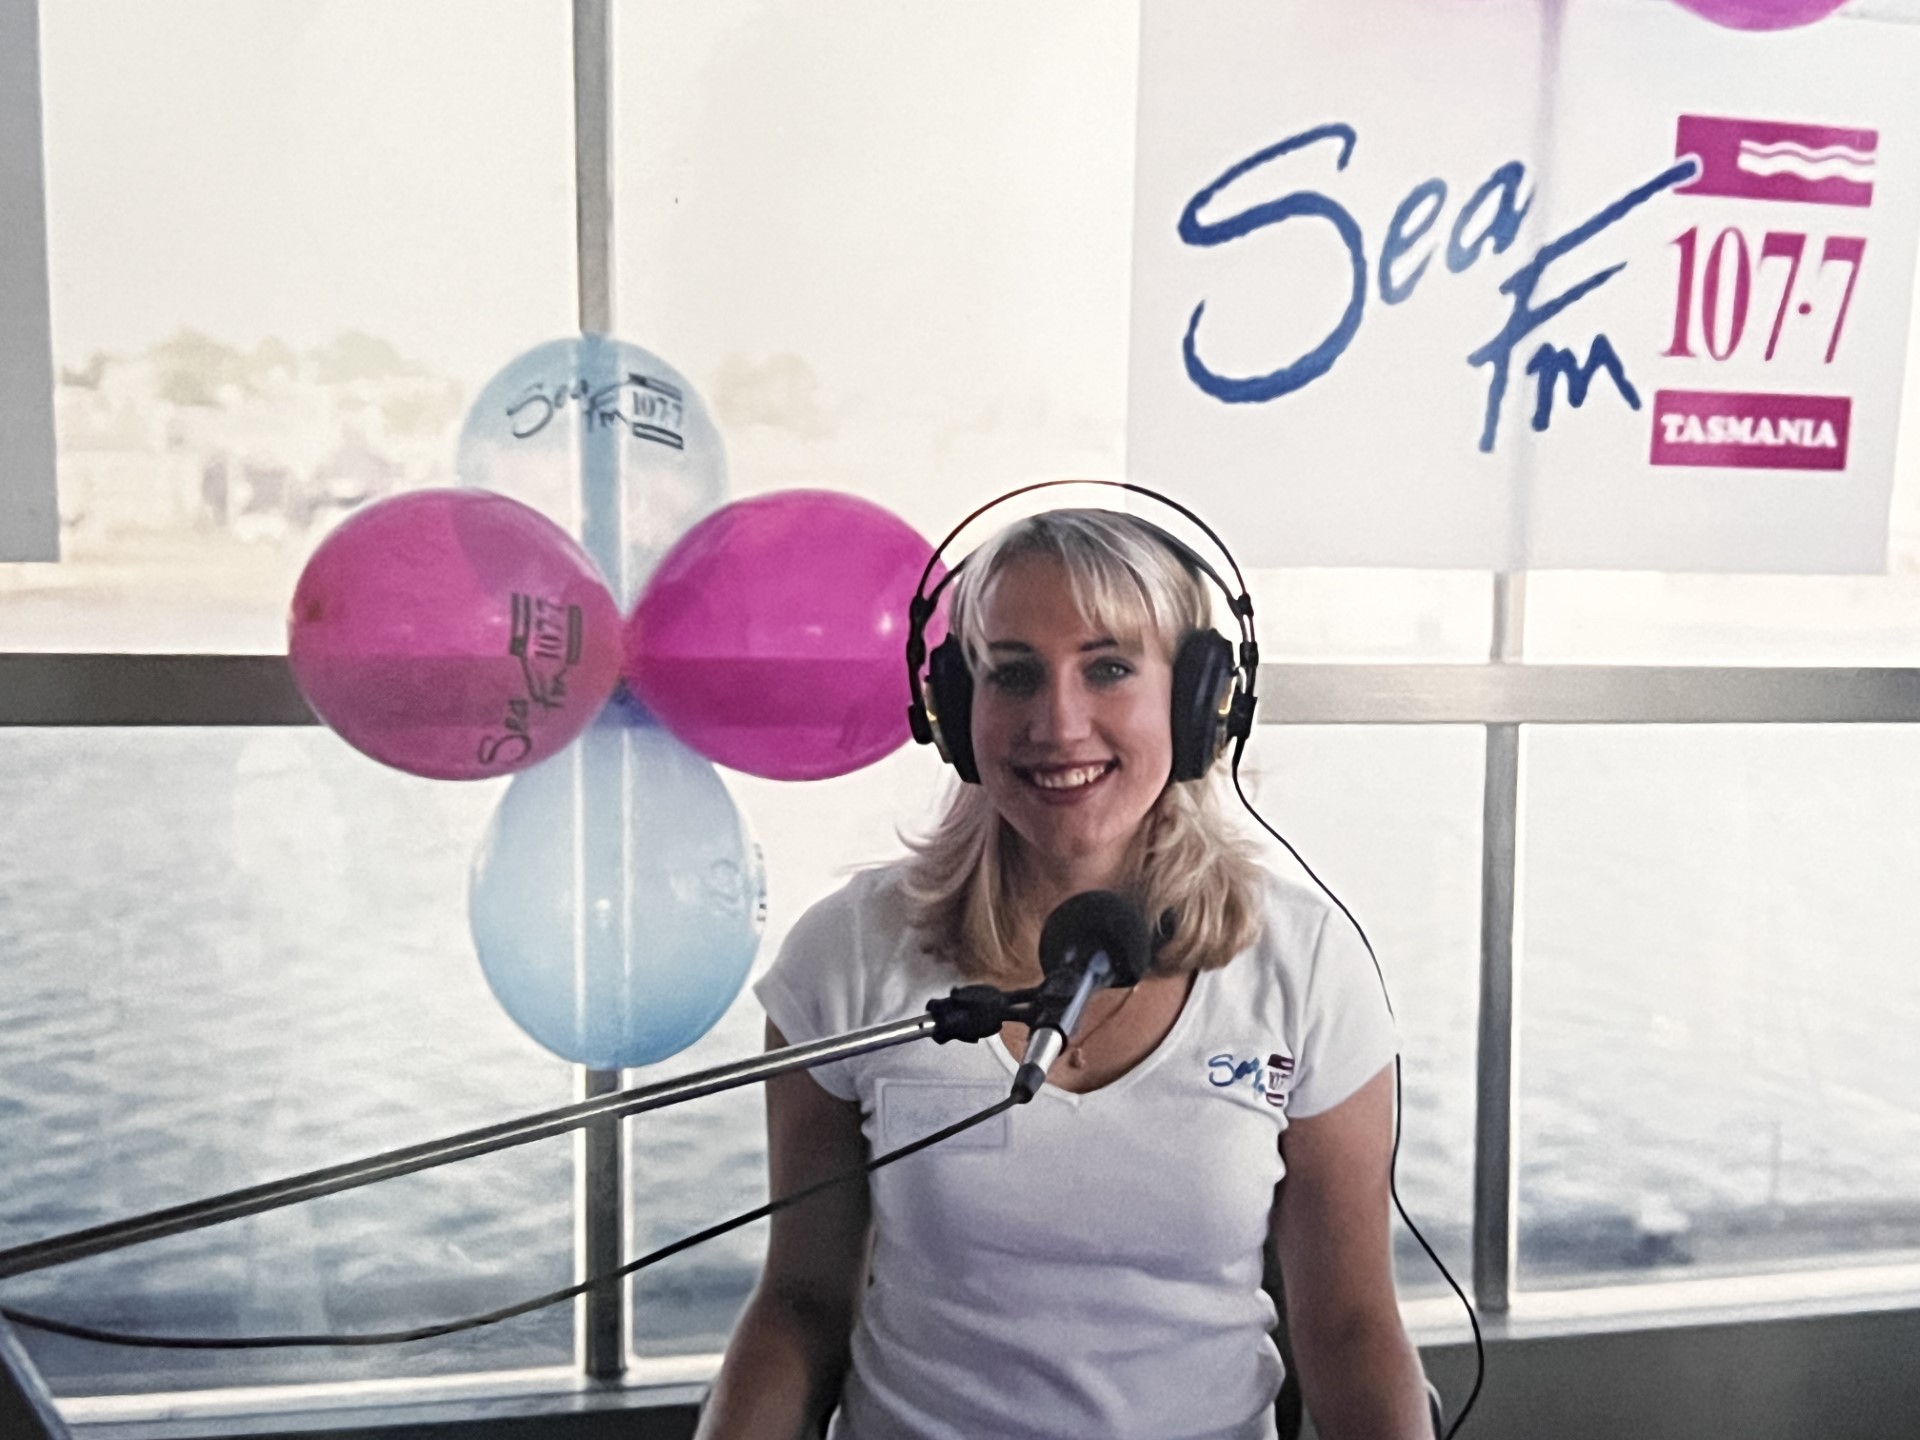 Emily Jade O'Keeffe at the launch of Sea FM Devonport in 1999, the start of her breakfast radio career. Emily is wearing a white t-shirt with the Sea FM logo, and headphones, with pink and blue balloons decorating the window behind. (Picture: Emily Jade O’Keeffe)